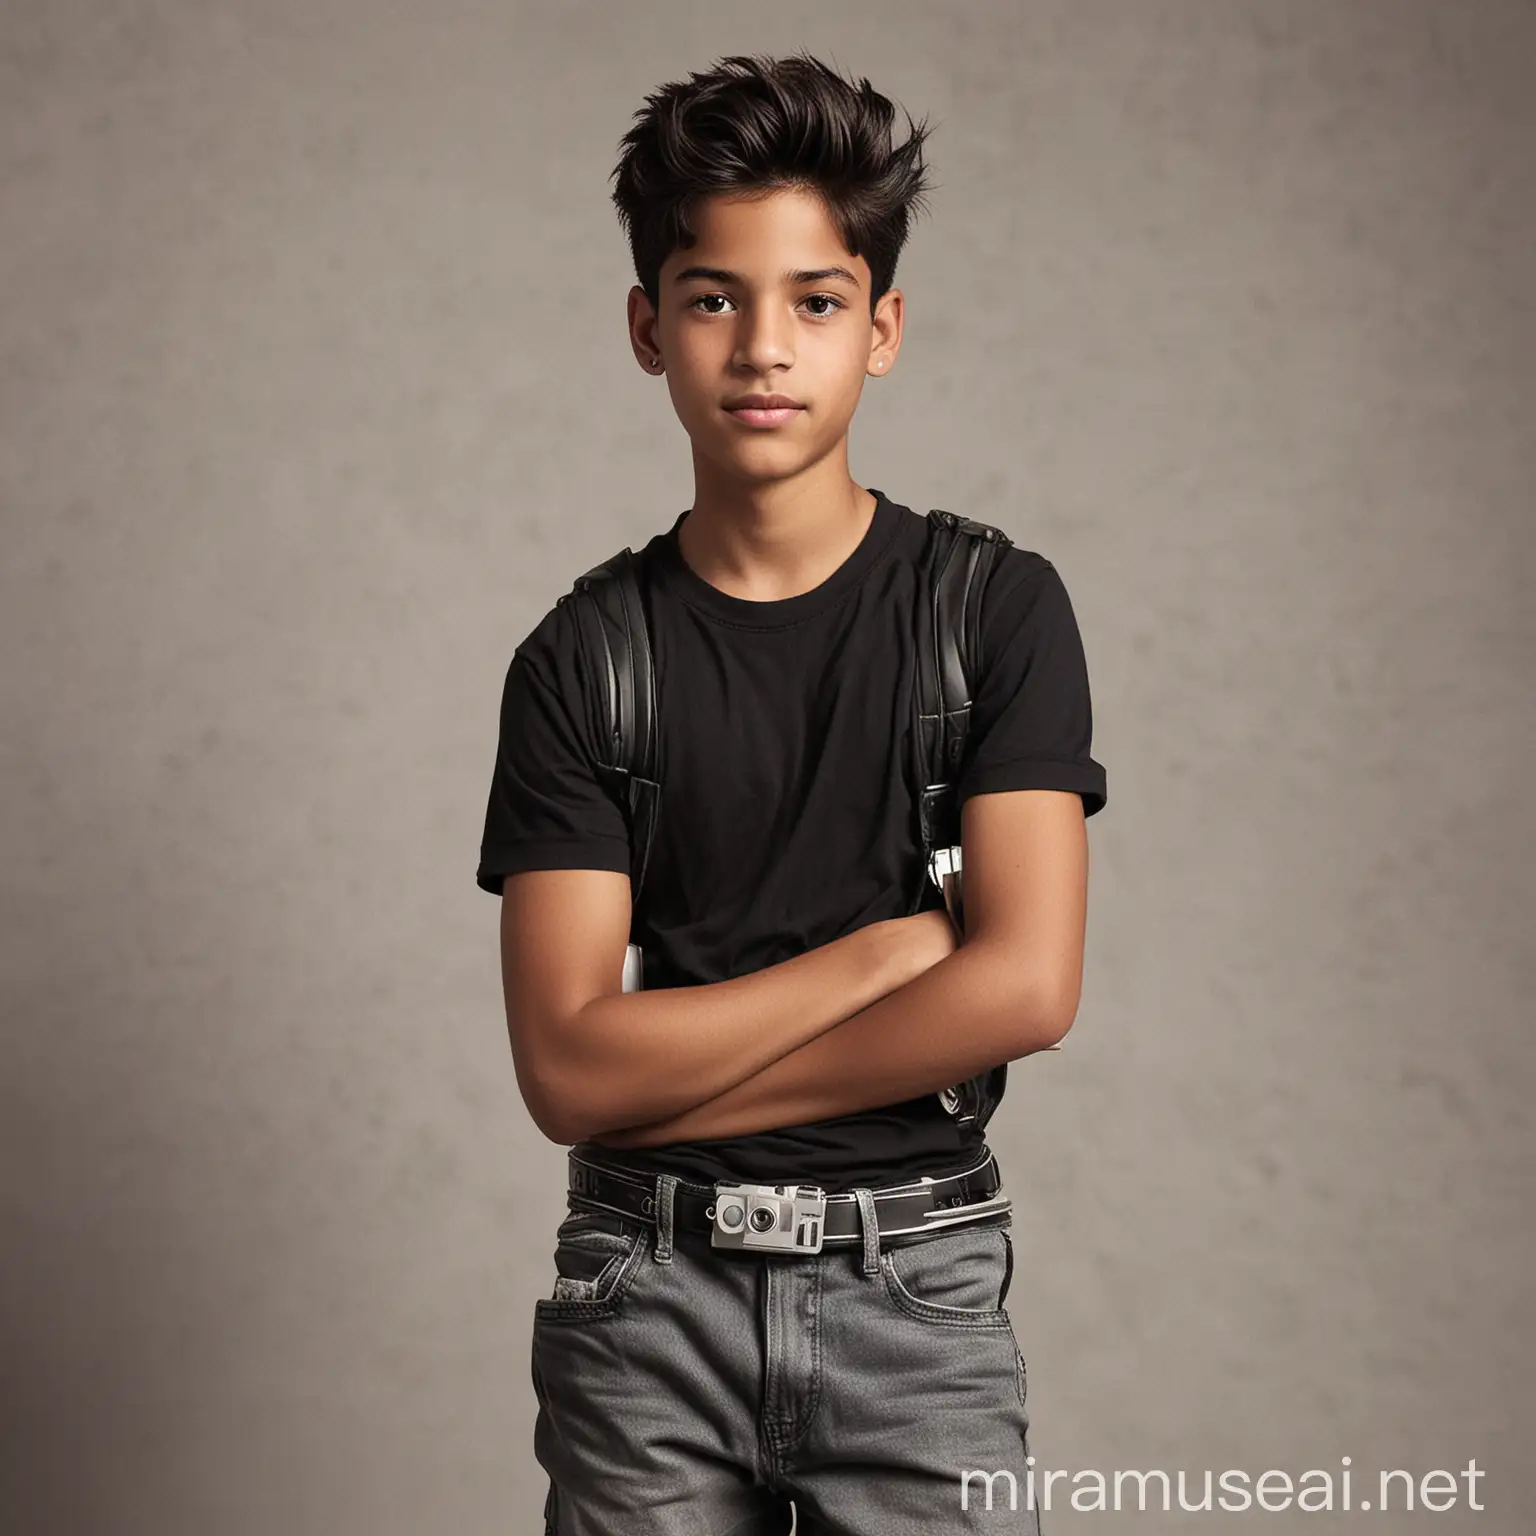 A Hispanic guy, 15-years-old, brown skin, dark black eyes and combed hair. He wears a black t-shirt, driving gloves, black and white lightly worn sneakers, light gray bermudas with a detachable black pocket hanging from a black belt over his right leg and has a camera around his neck. He carries an kind and intelligence aura.